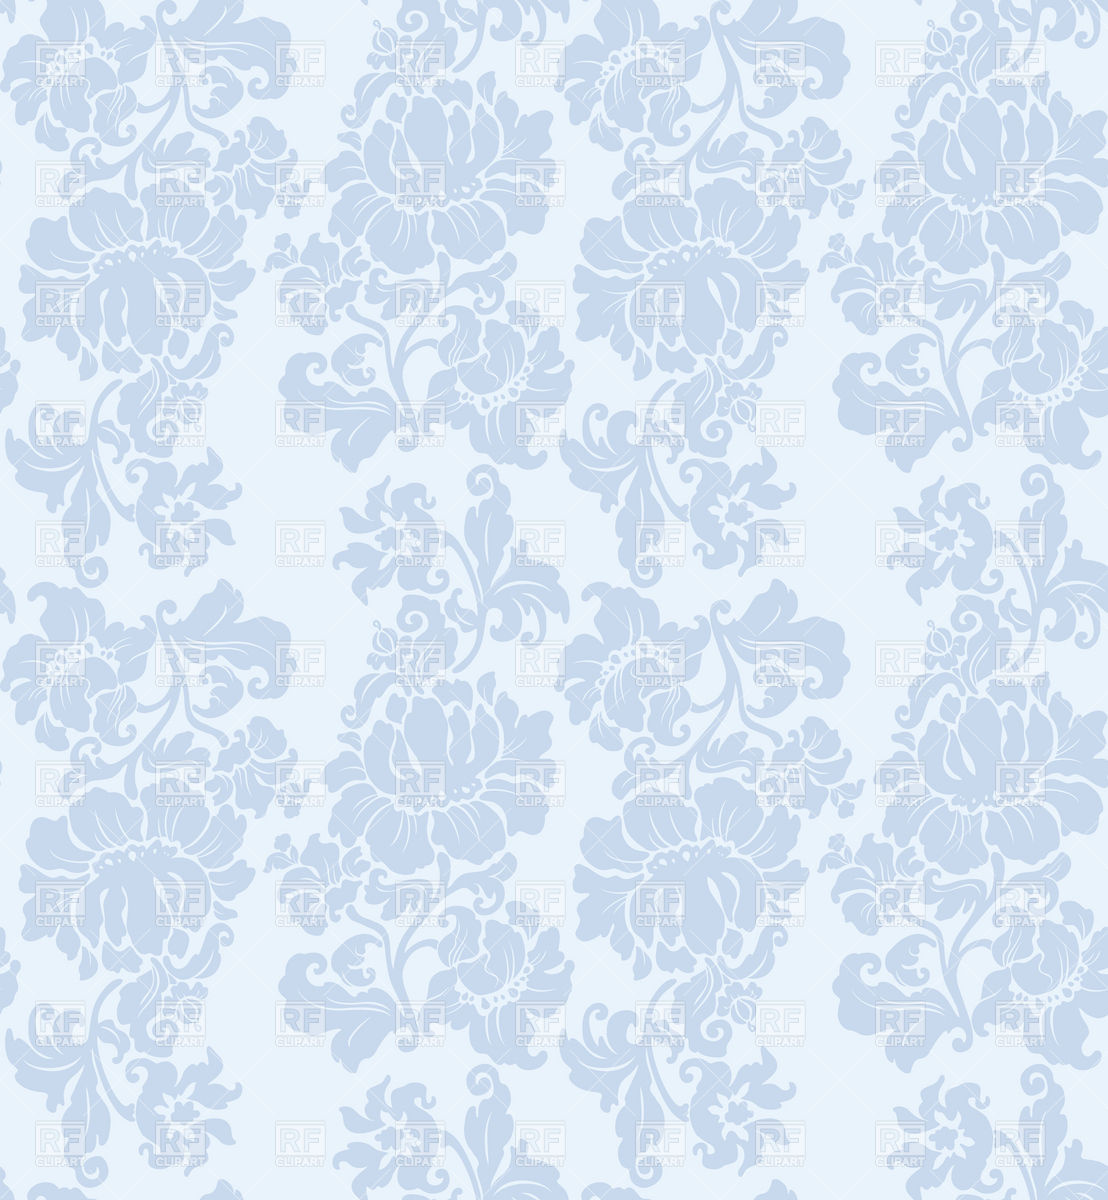 Floral Blue Seamless Victorian Wallpaper Royalty